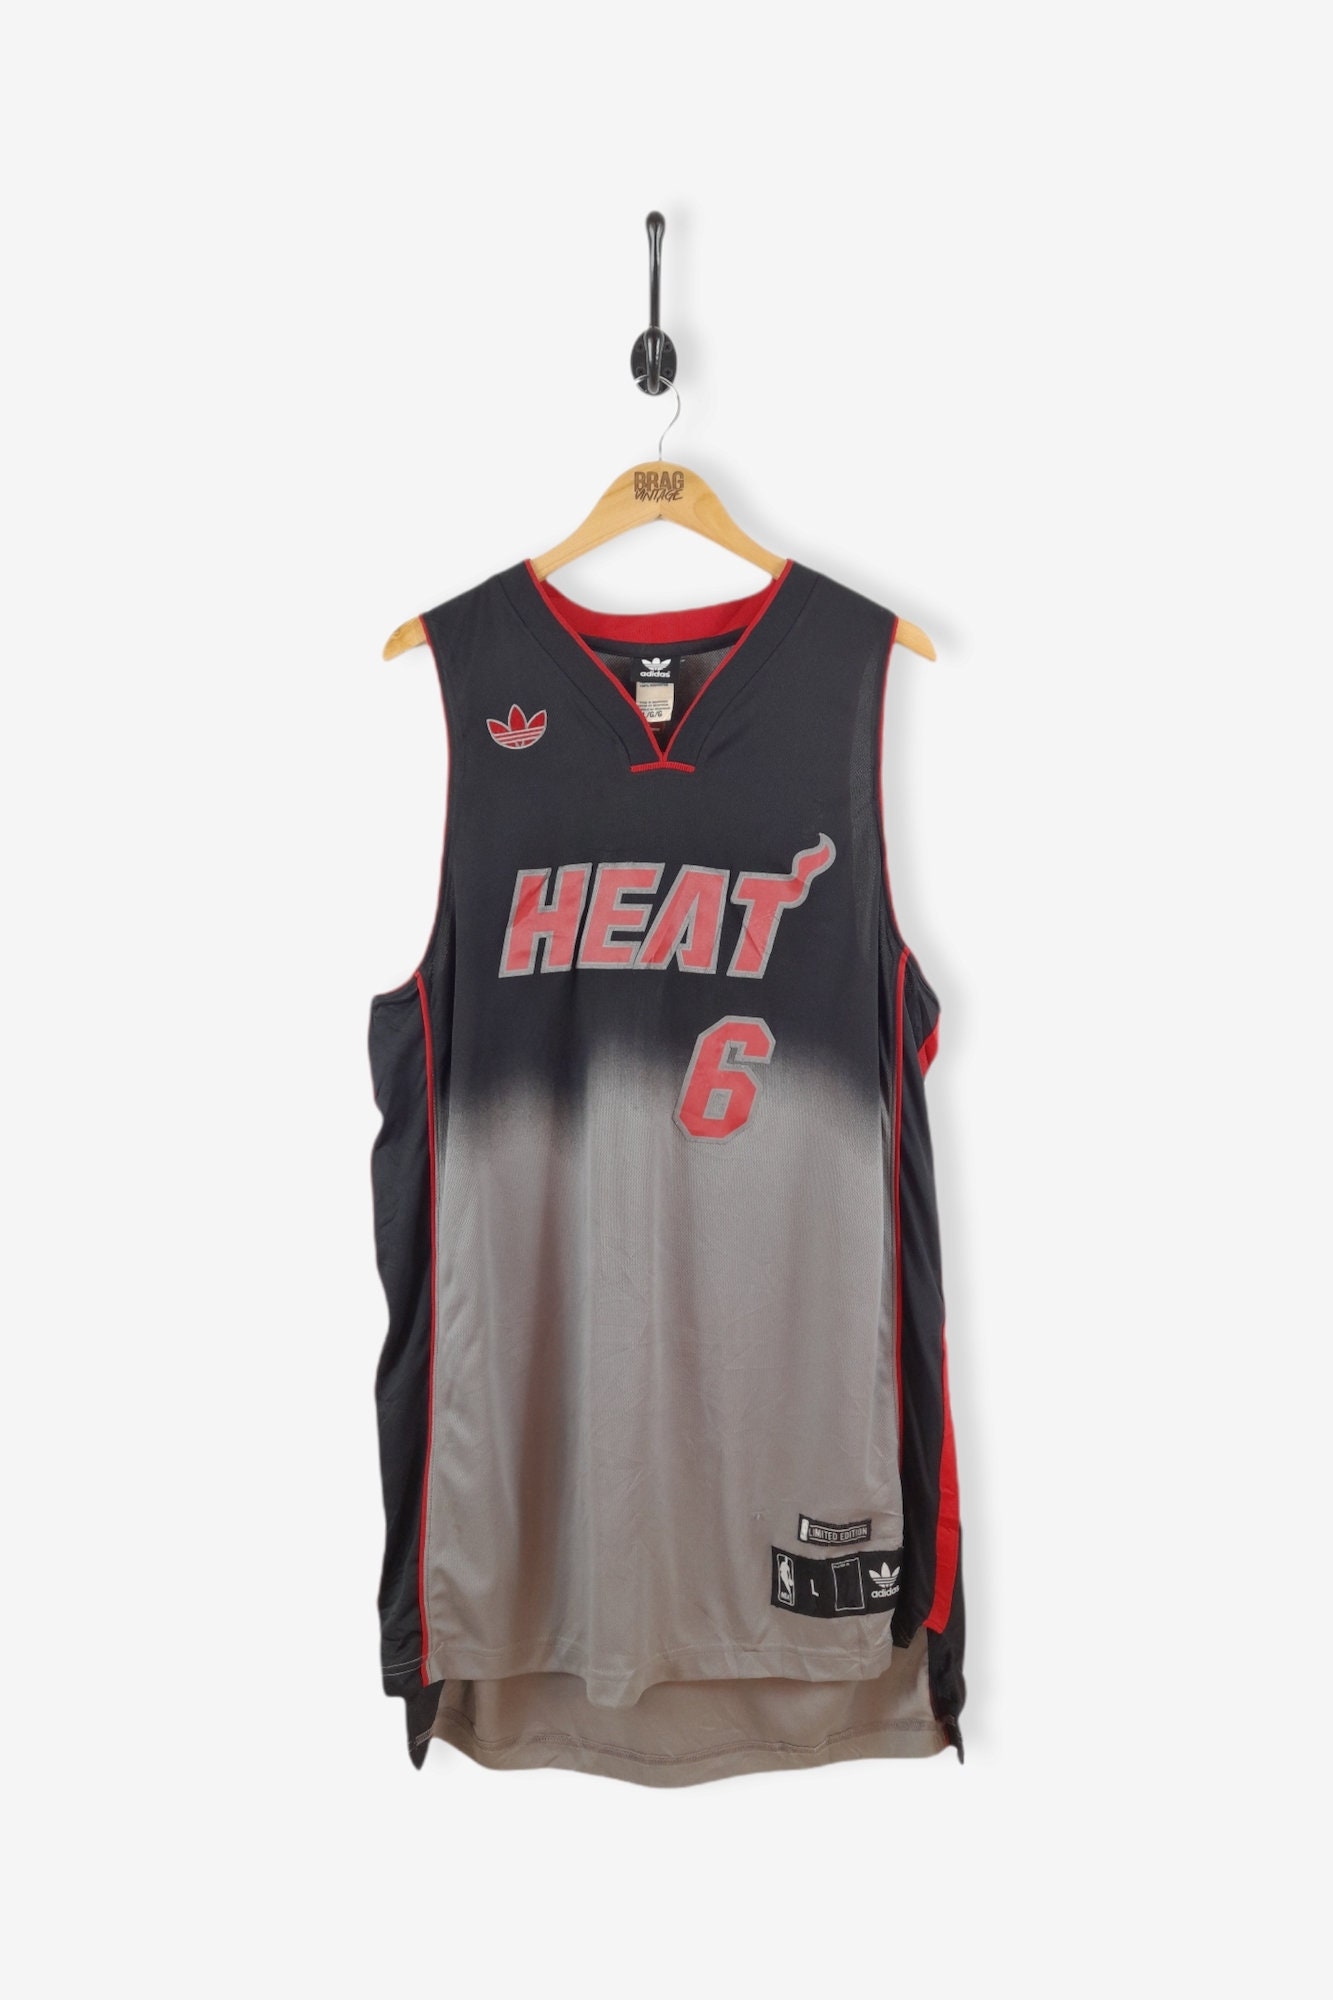 Buy Rare Nba Jersey Online In India -  India